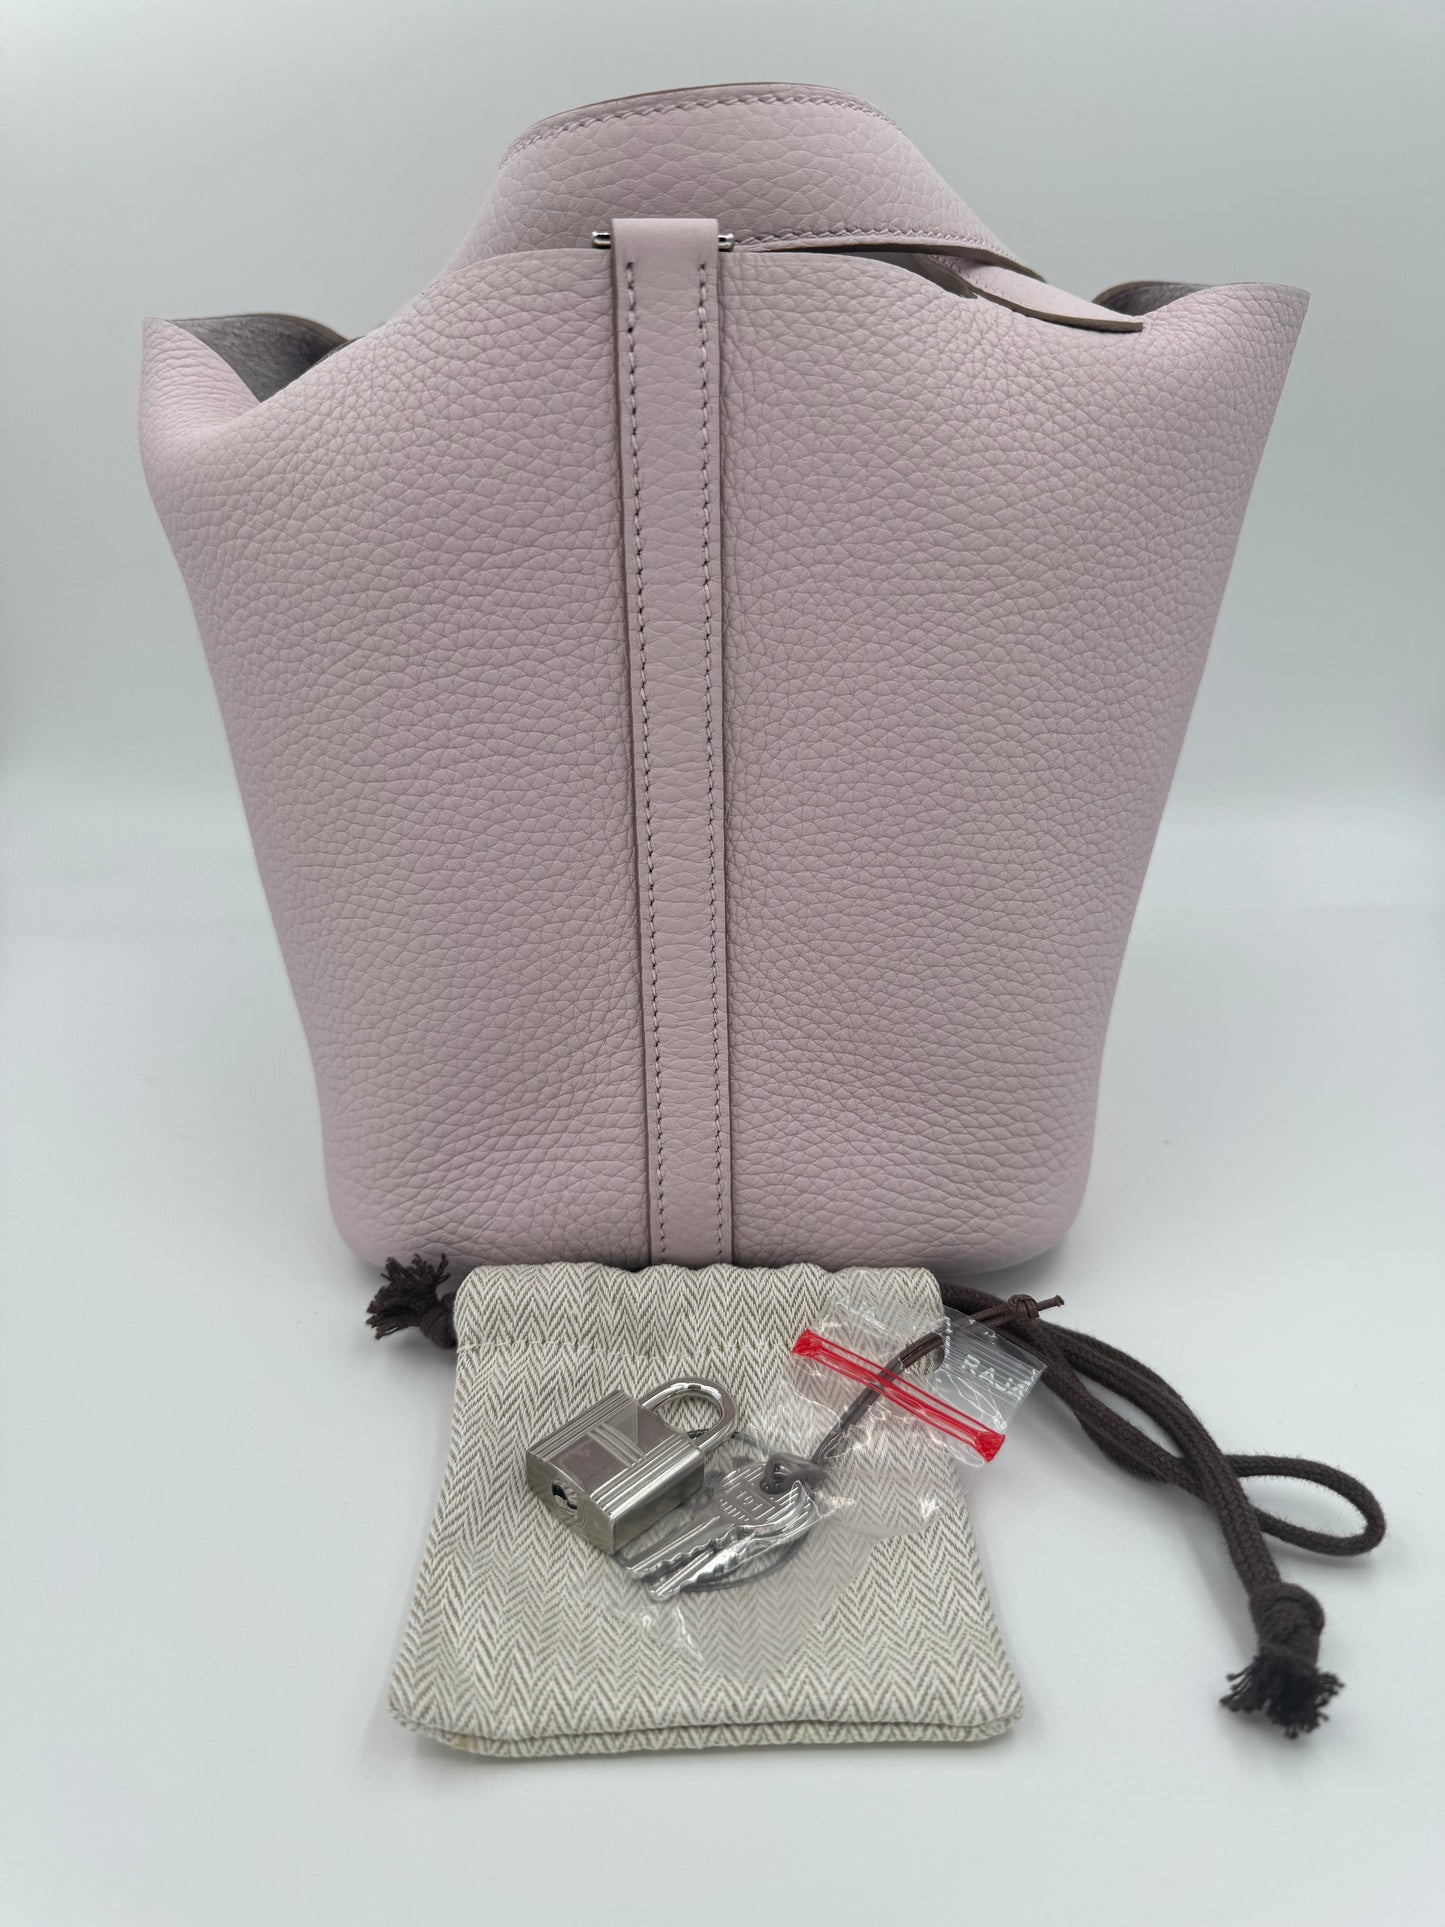 HERMES PICOTIN LOCK 18 TAURILLON CLEMENCE 09 MAUVE PALE STAMP W